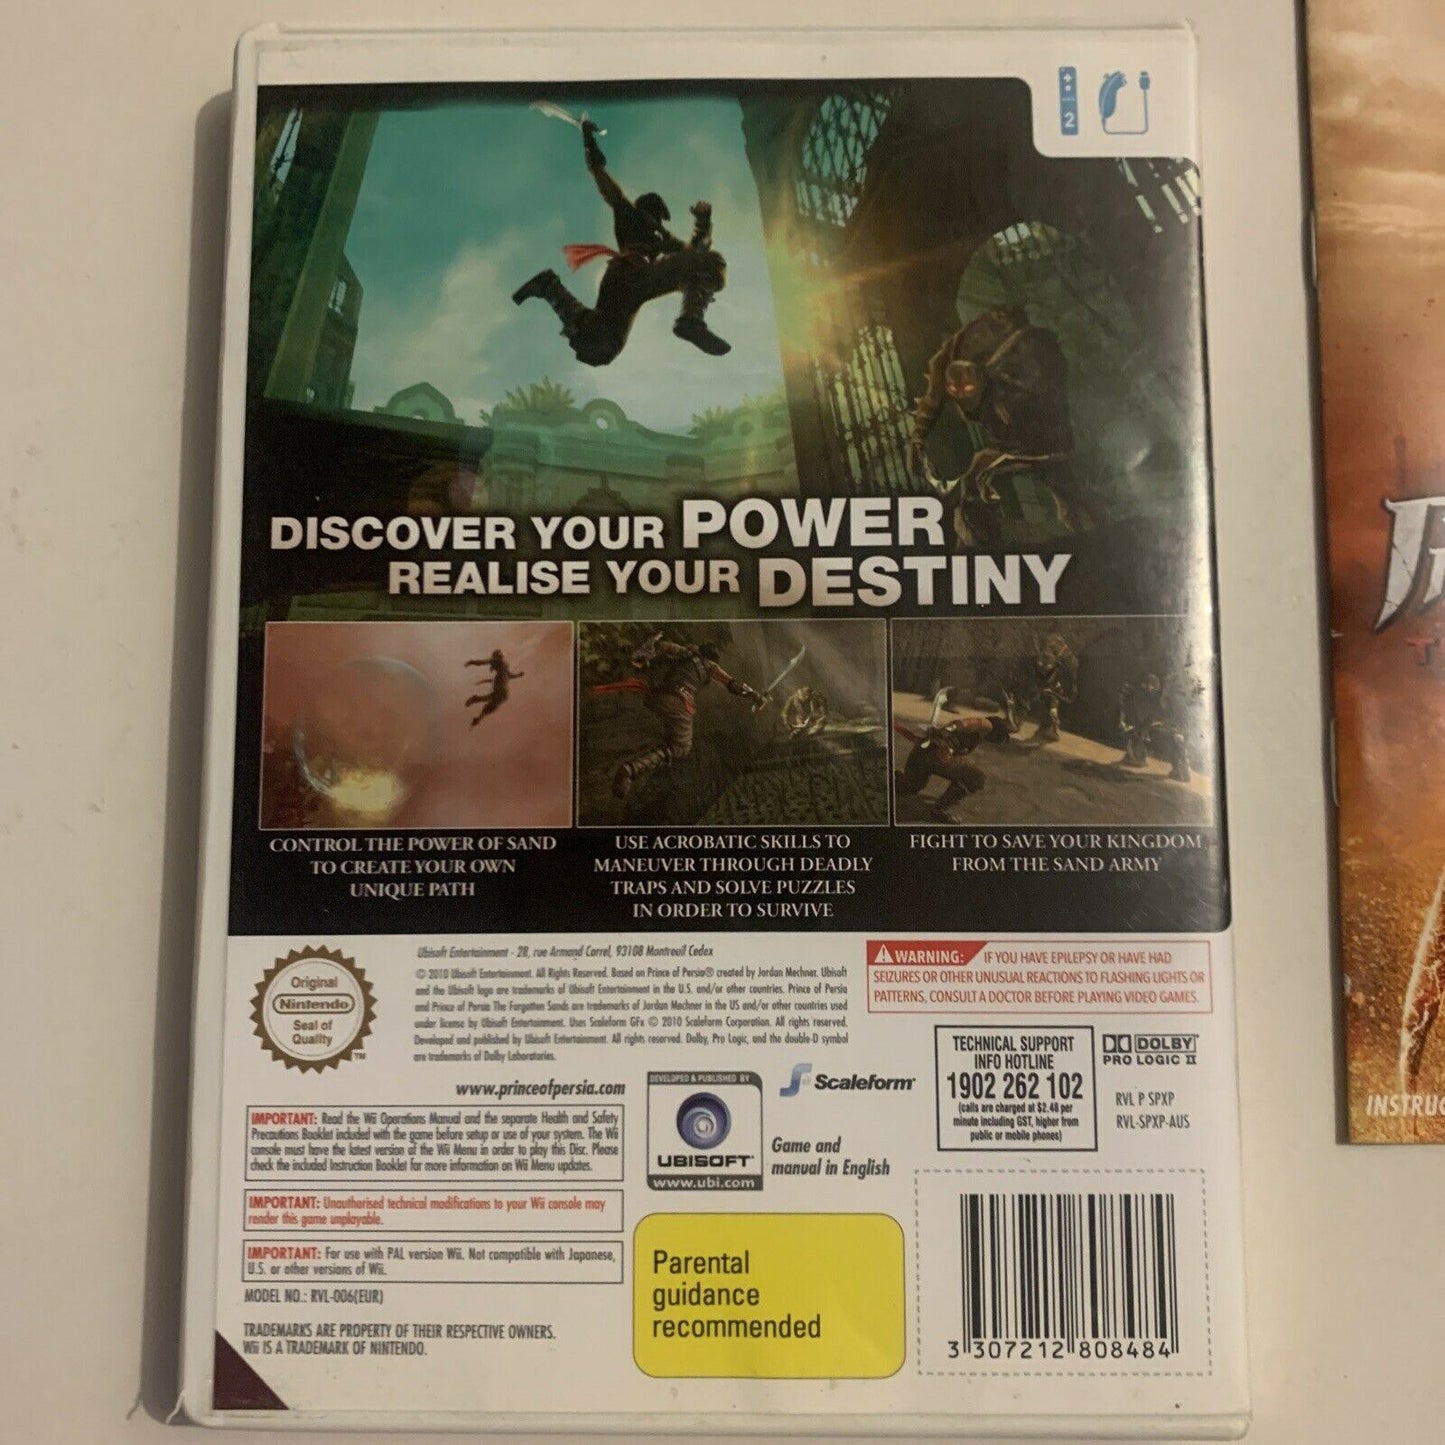 Prince of Persia The Forgotten Sands - Nintendo Wii PAL Complete With Manual